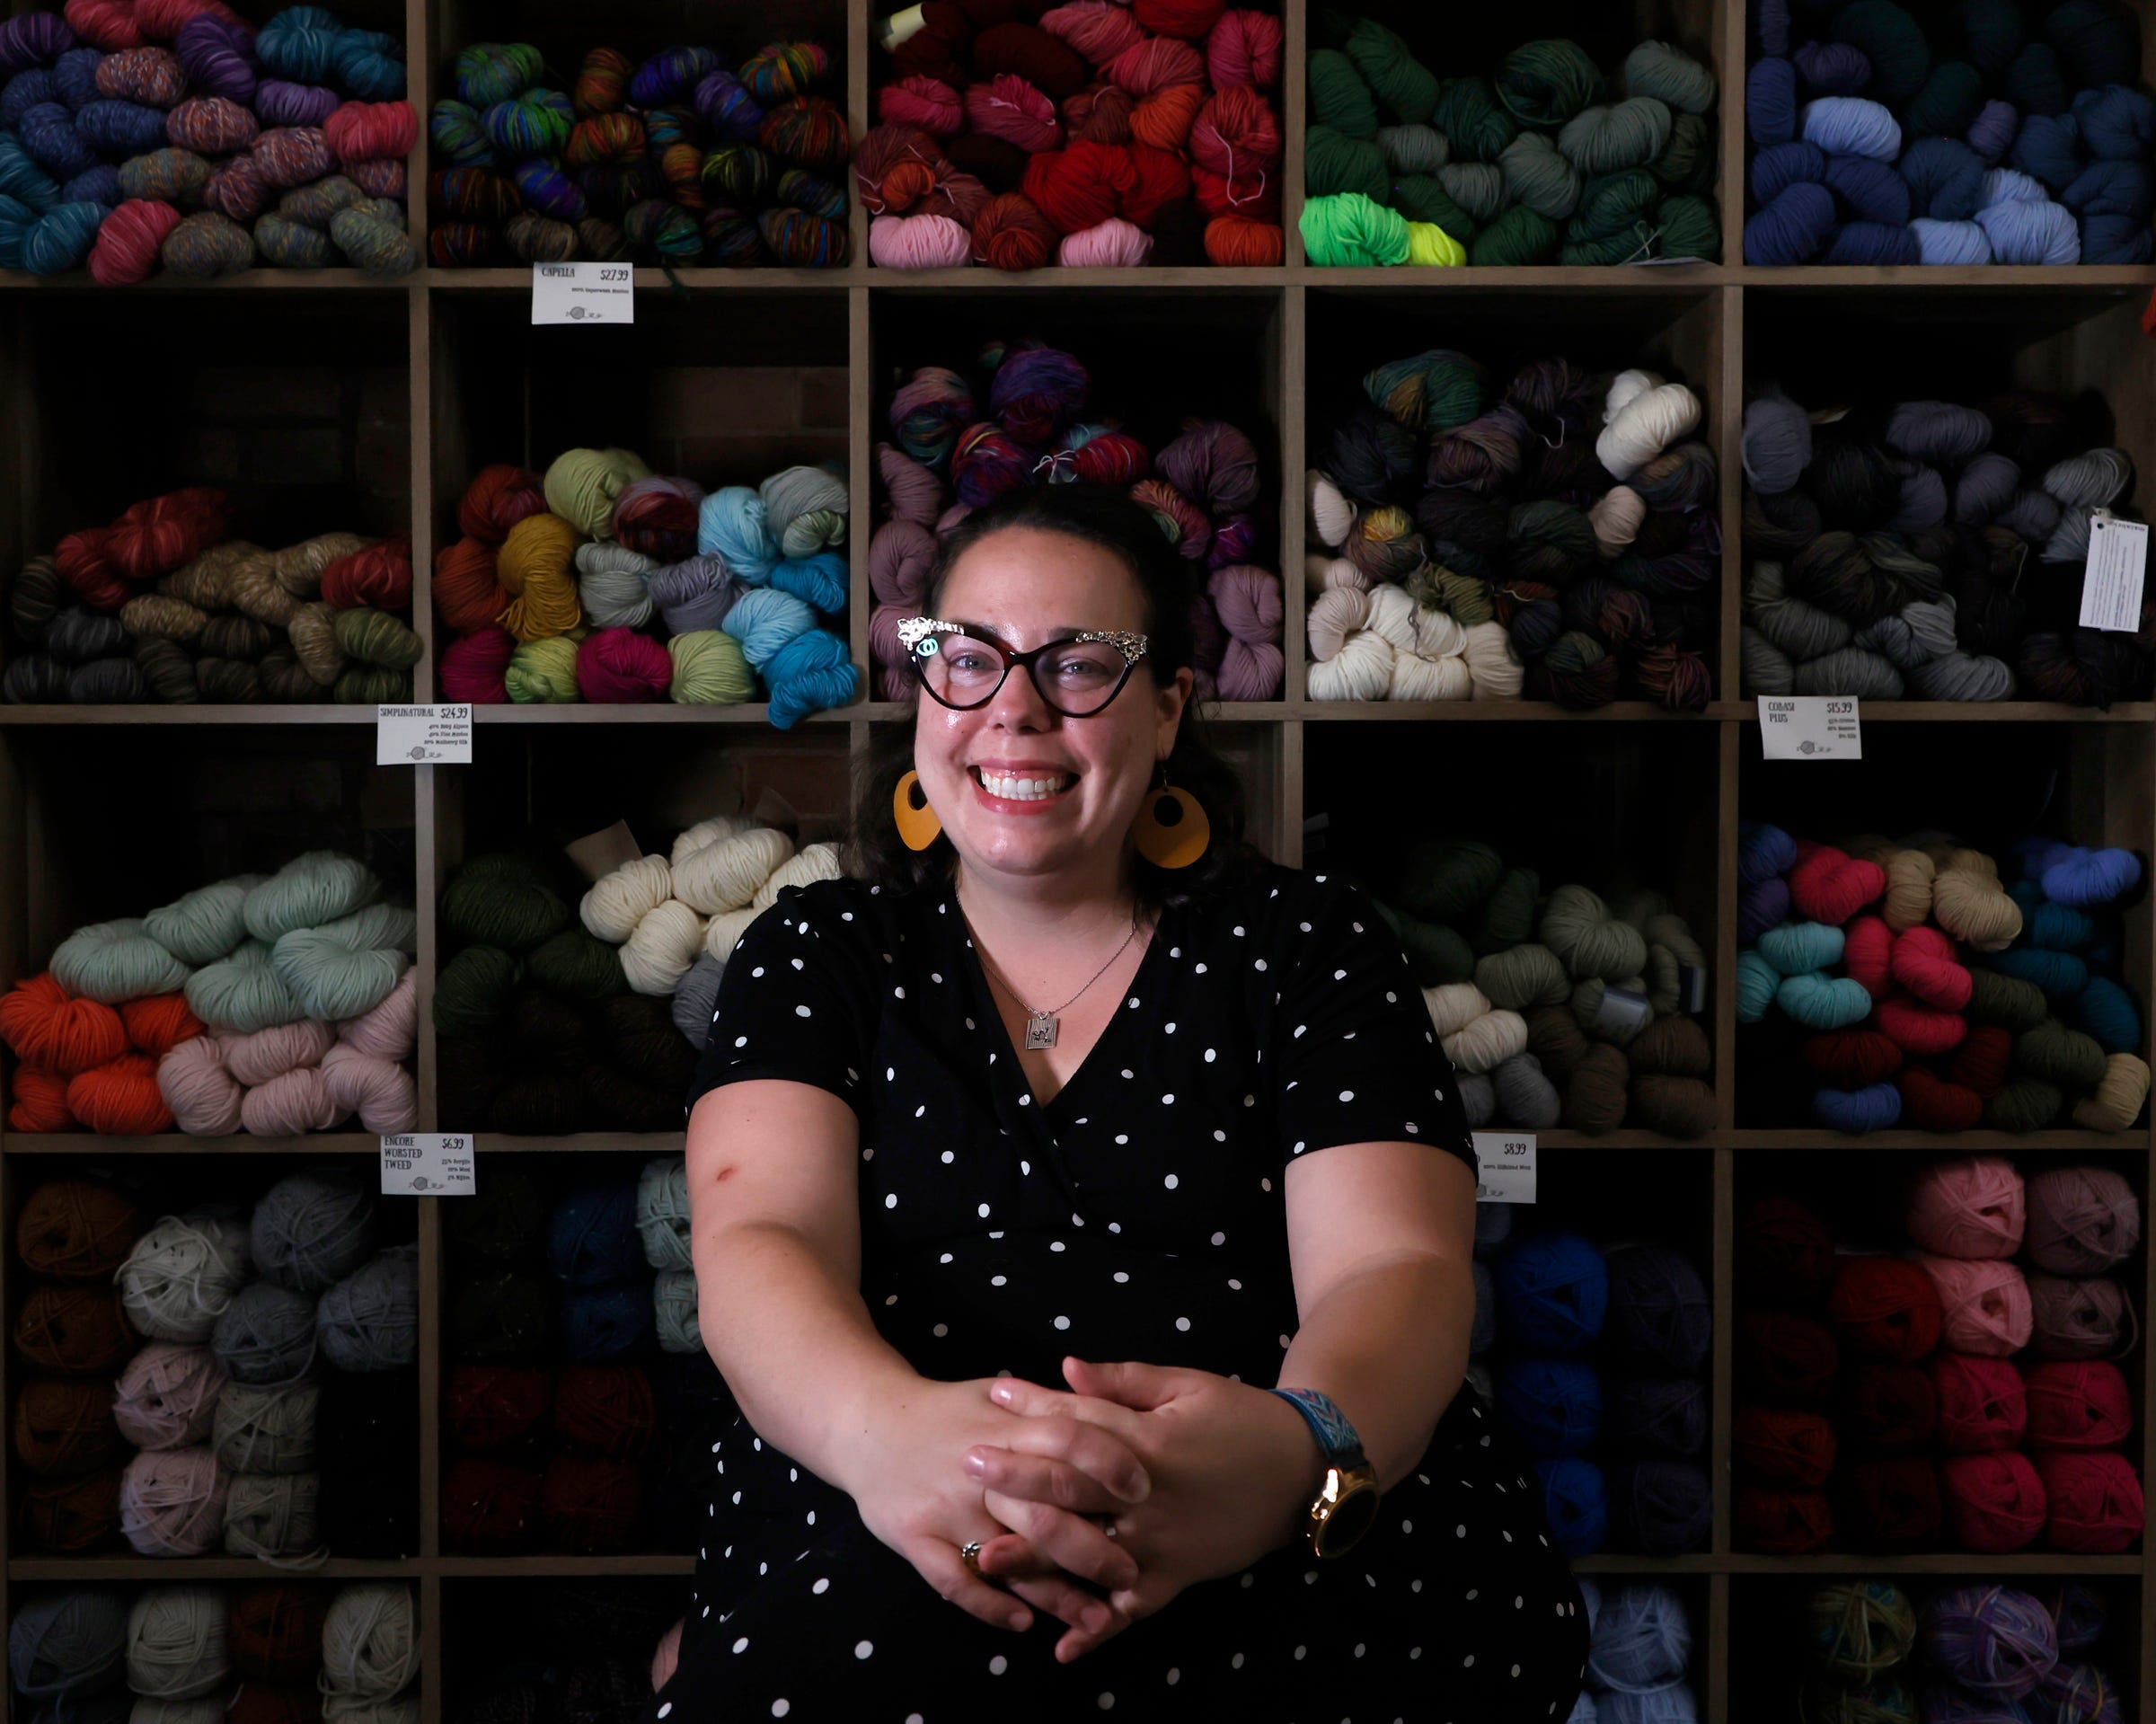 Michelle Beechler, owner of Tink and The Frog, inside her knitting store in Adrian on Sept. 1, 2022. Beechler taught at nearby Adrian College but left the school over disagreements with the school administration. She opened her popular store in March 2021.